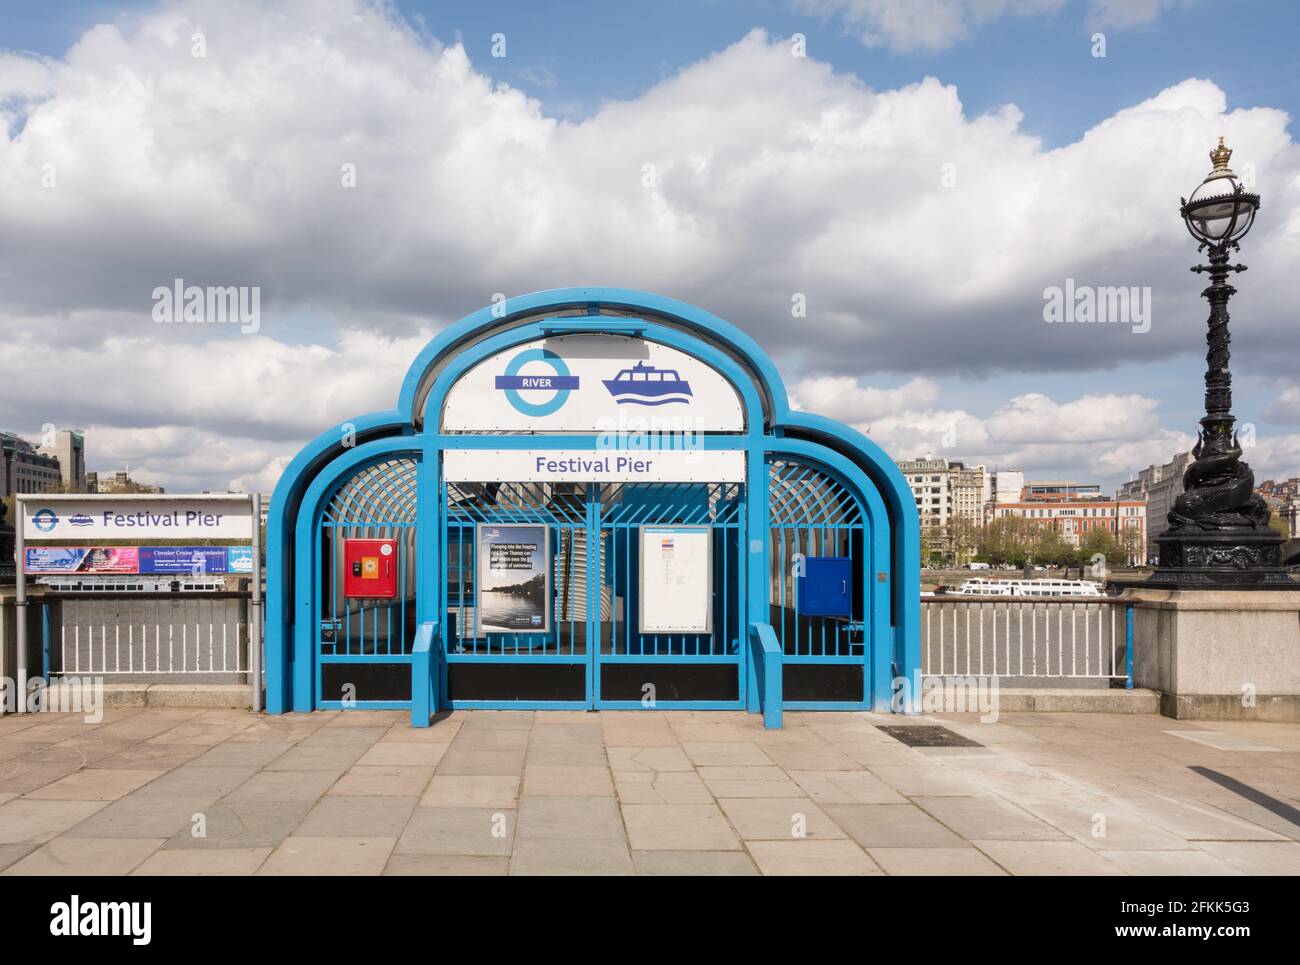 A closed Festival Pier on the River Thames, Southbank, Waterloo, London, England, UK Stock Photo